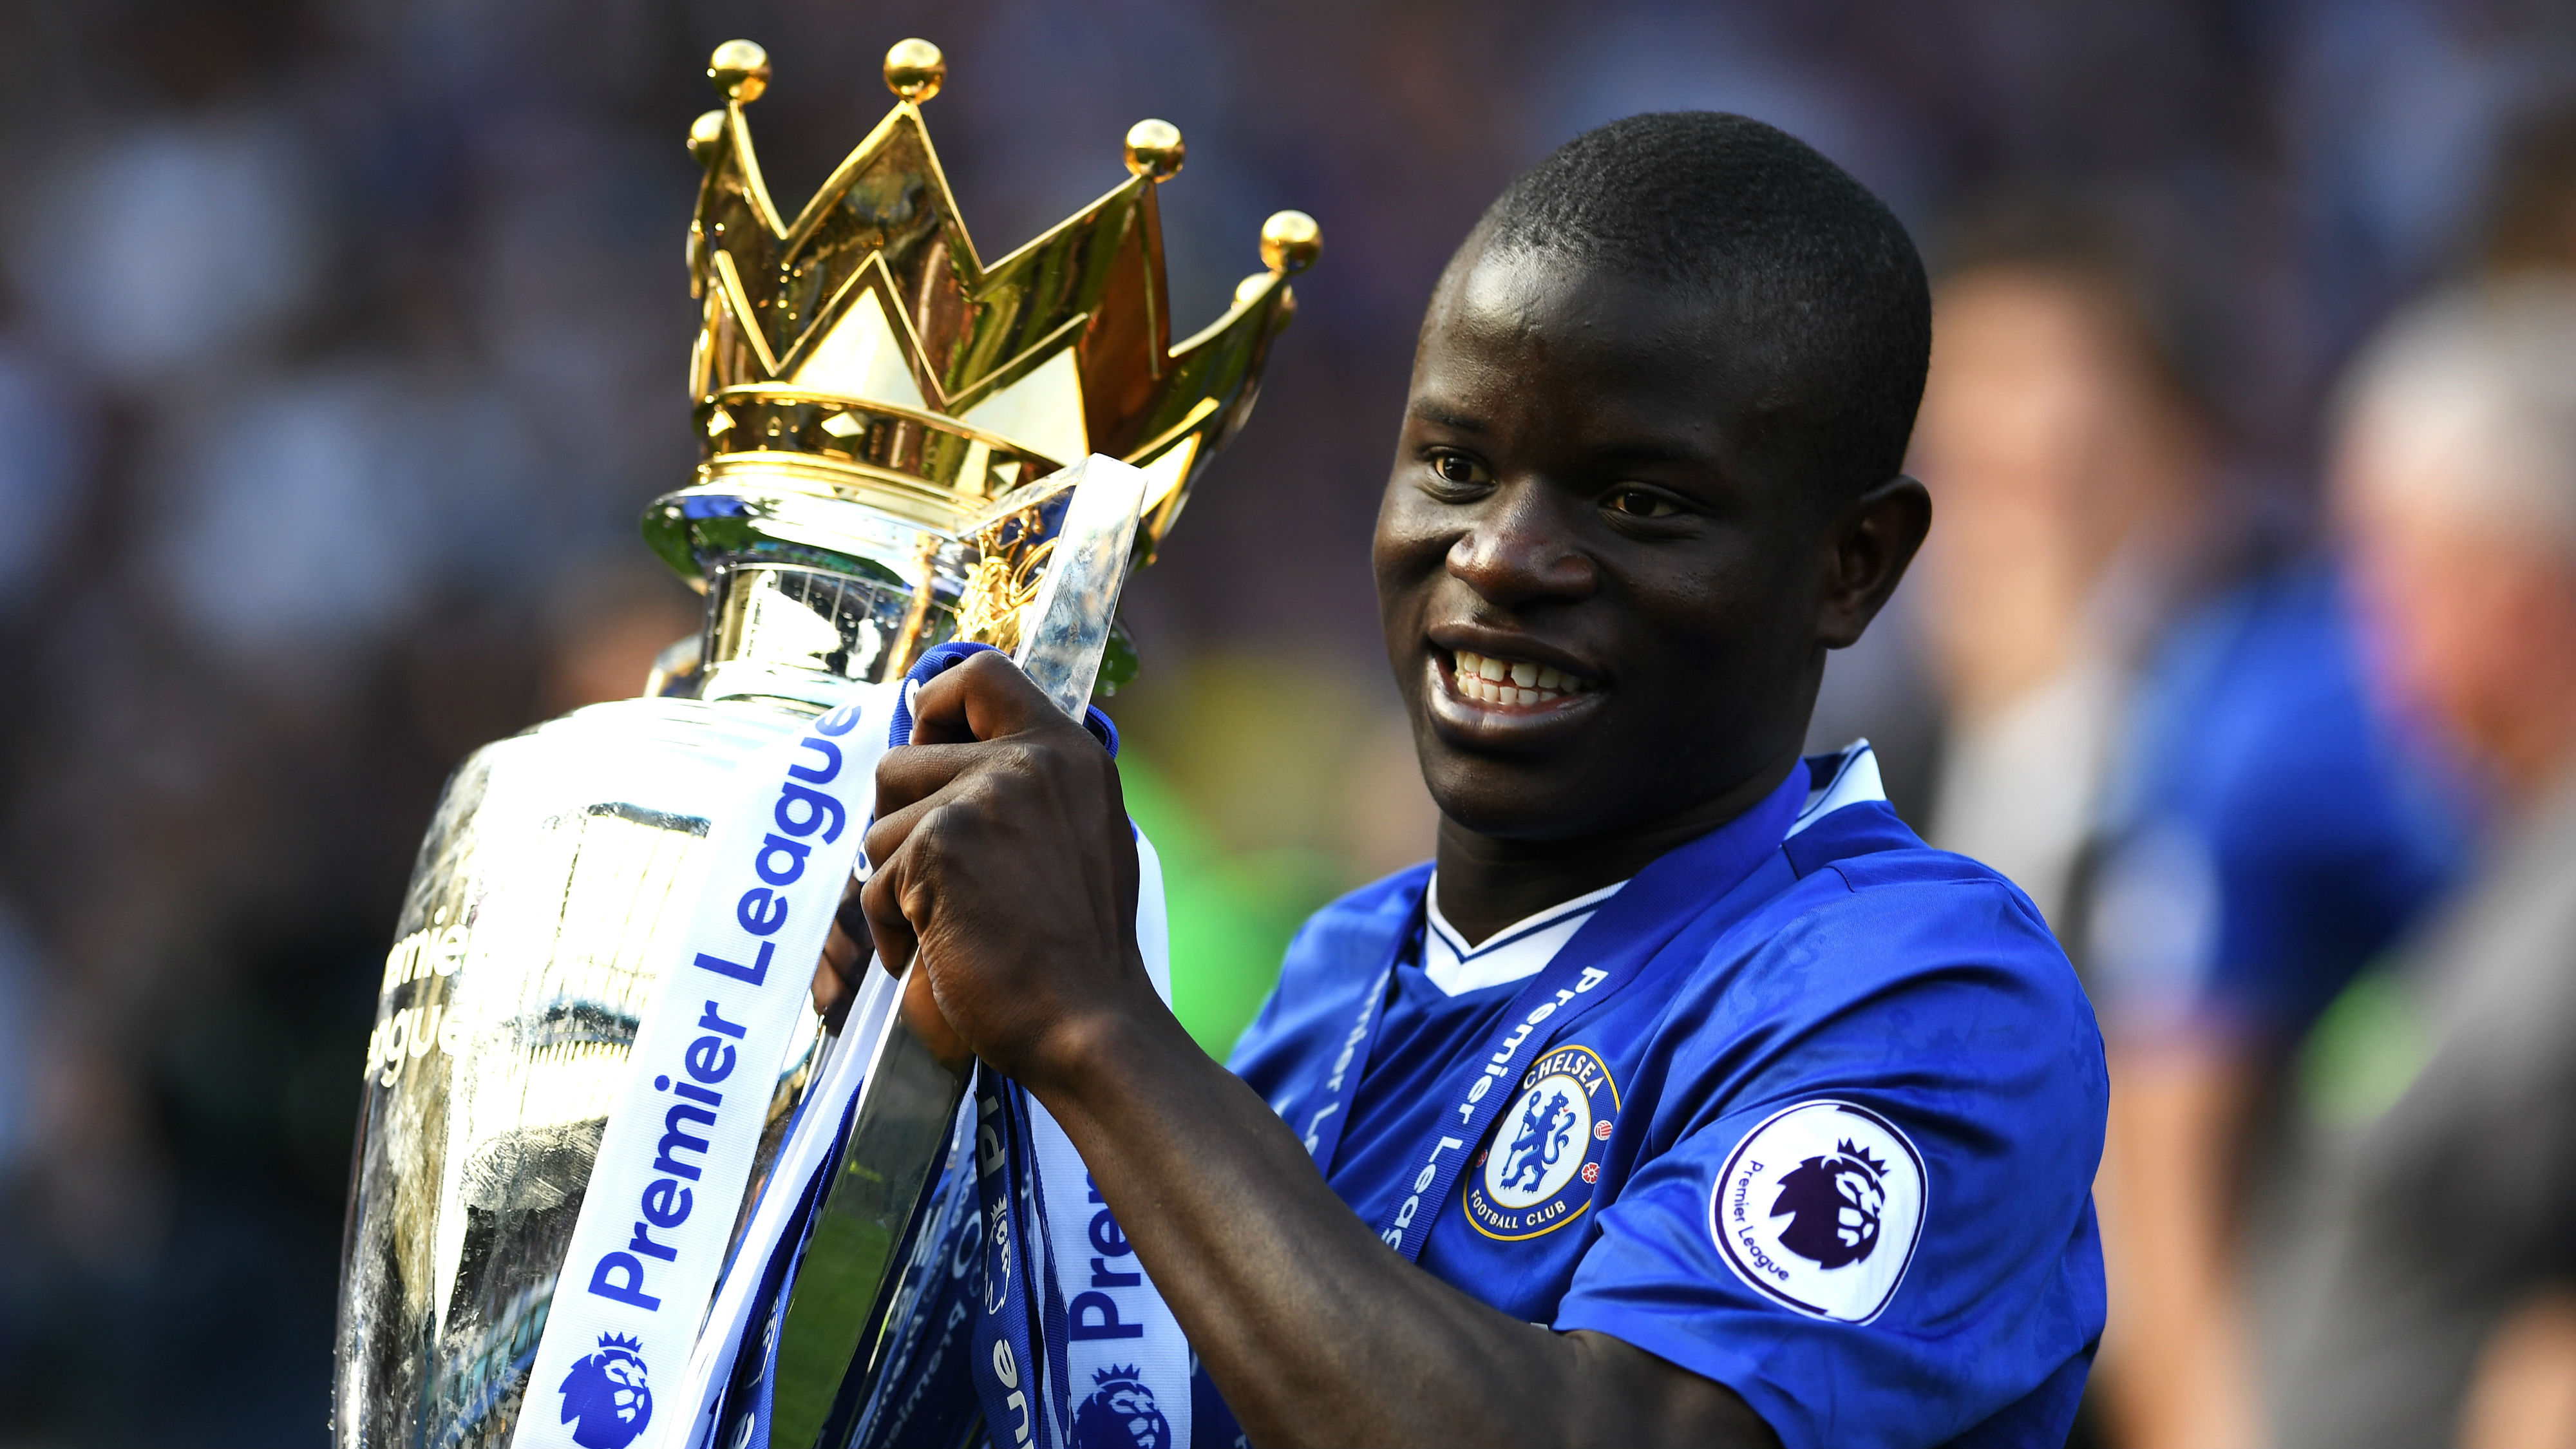 N’Golo Kante won the Premier League with Chelsea in 2016-17 and Leicester City in 2015-16